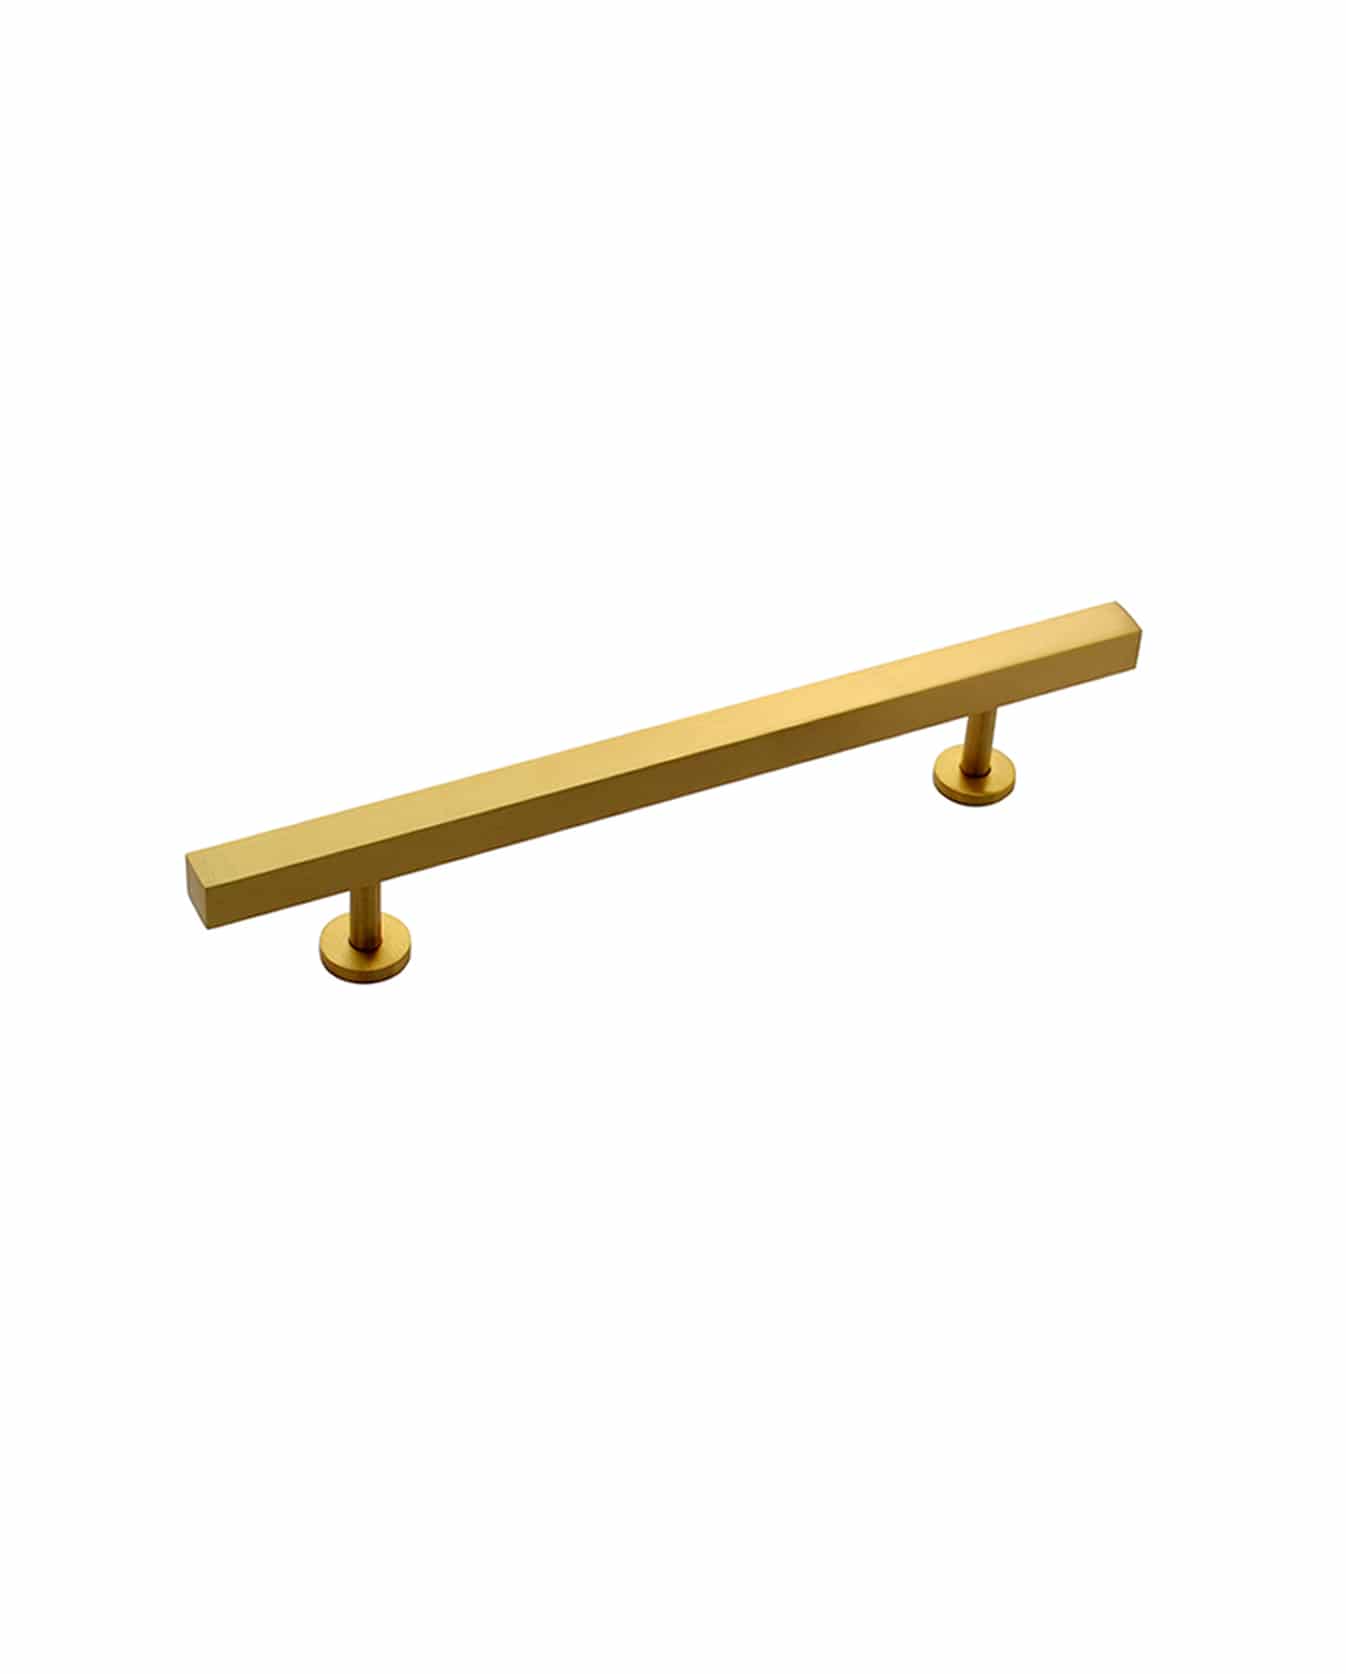 Cabinet Pull Square Bar,square bar handle pull for kitchen,19 inch pull handles for kitchen,pull handles for dresser drawers,brushed brass drawer pull handle,brass pull handle for kitchen cabinet,Brass pull,19 inch pull,Hand crafted pull,square shape pull,pull for kitchens,pull for drawers,pull for Vanity,pull for Dressers,Brushed Brass pull,square pull 19 inch,square cabinet pulls,modern cabinet pulls,Kitchen handles,Satin brass pulls,kitchen door pulls,vanity pull handles,Satin nickel handles,drawer pull handles,Large drop handles,golden pull handles,square pull handles,dresser pull handles